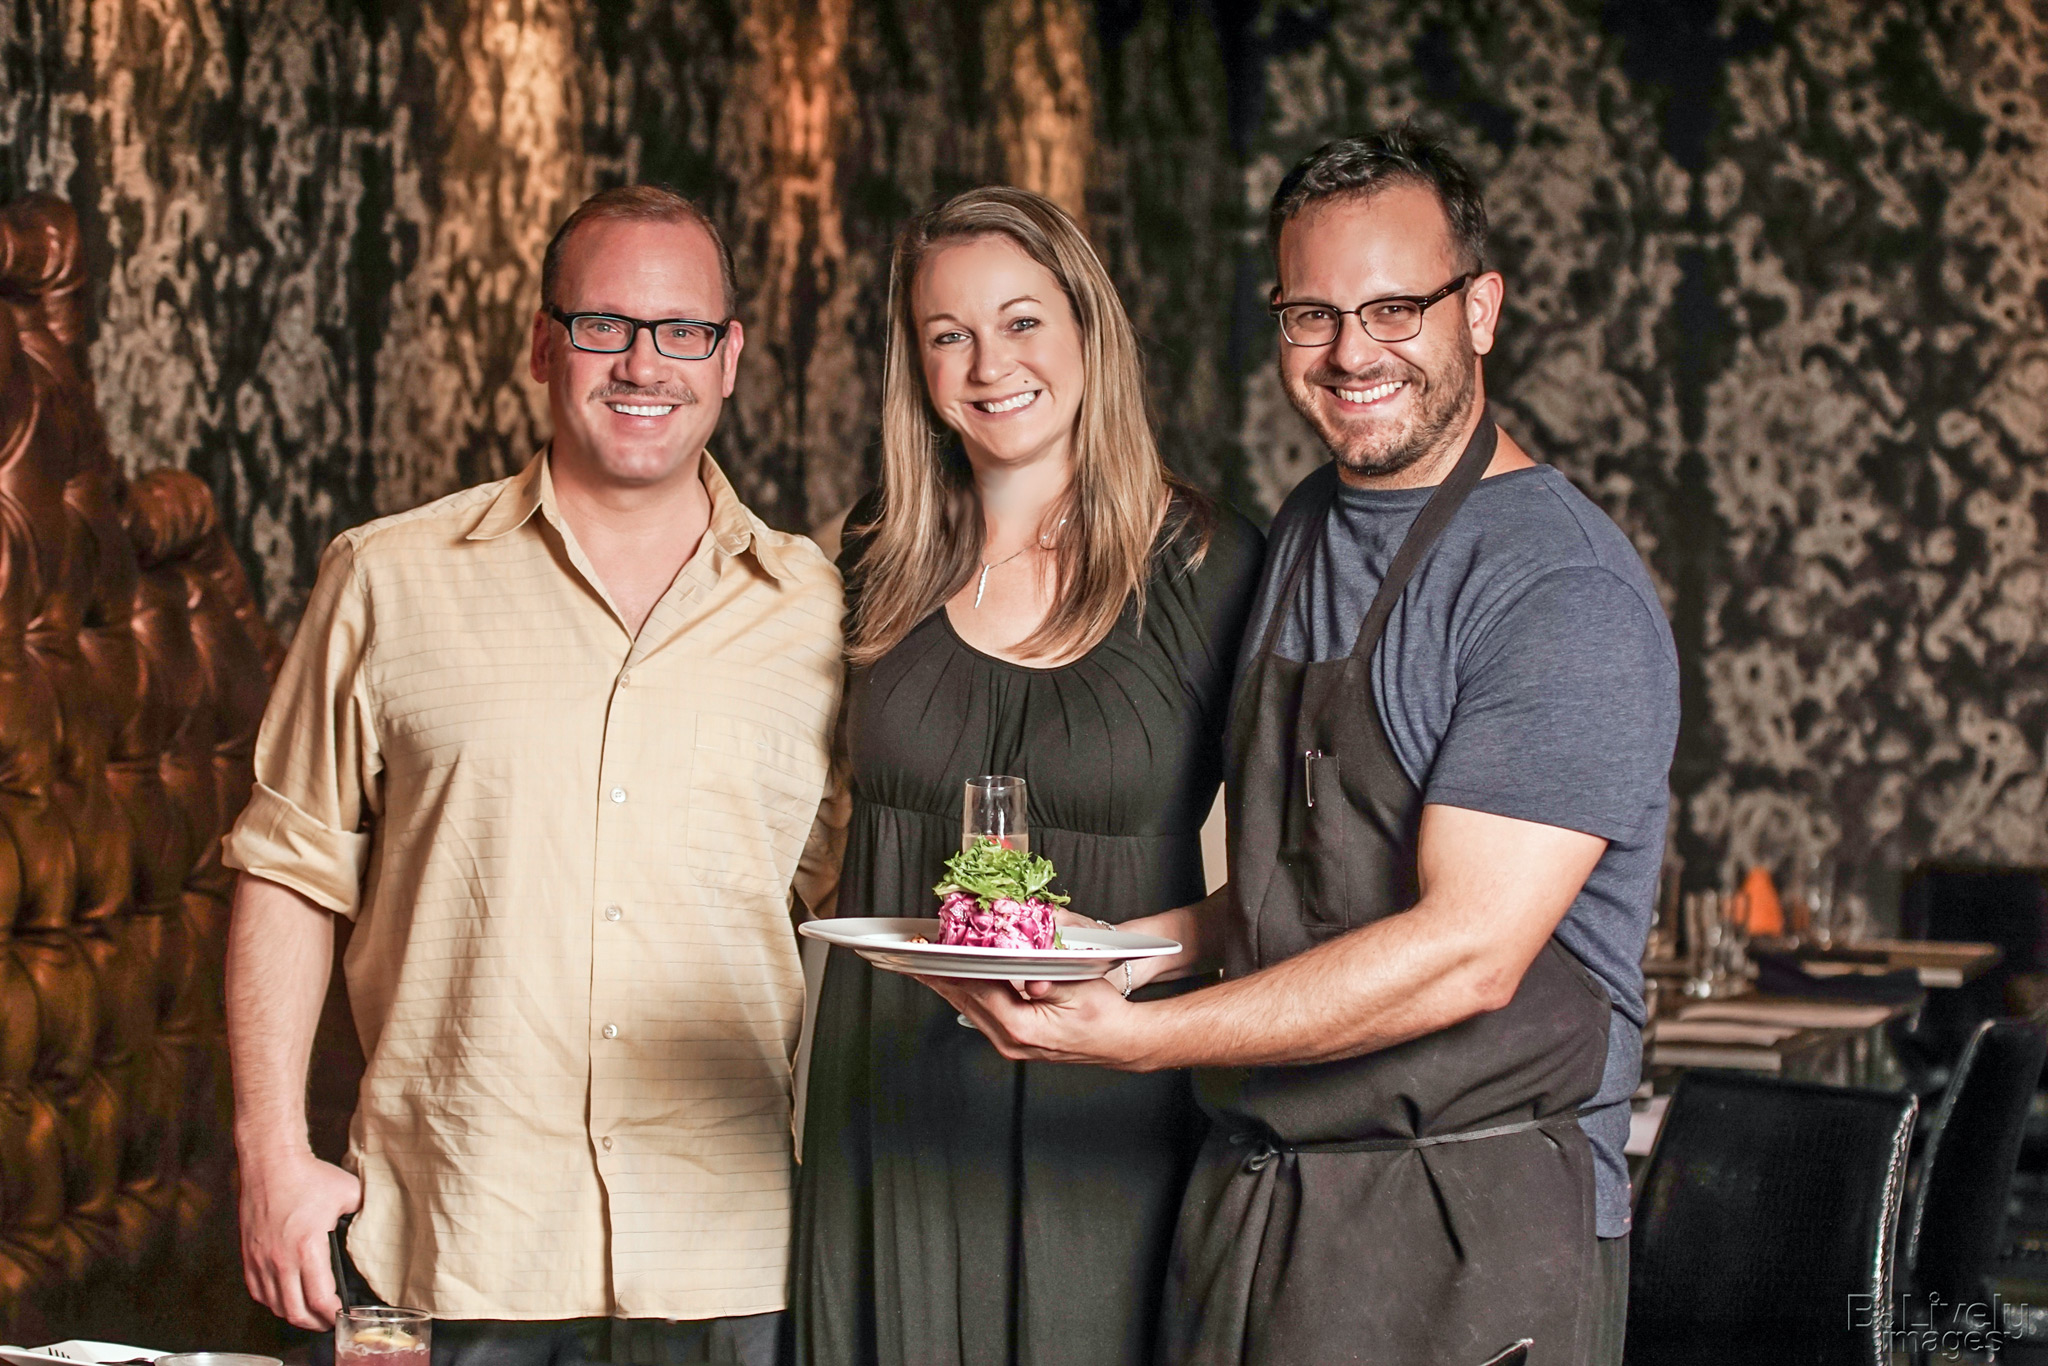 St. Petersburg Foodies Founders Kevin Godbee & Lori Brown with Chef Jon Robben at Tryst